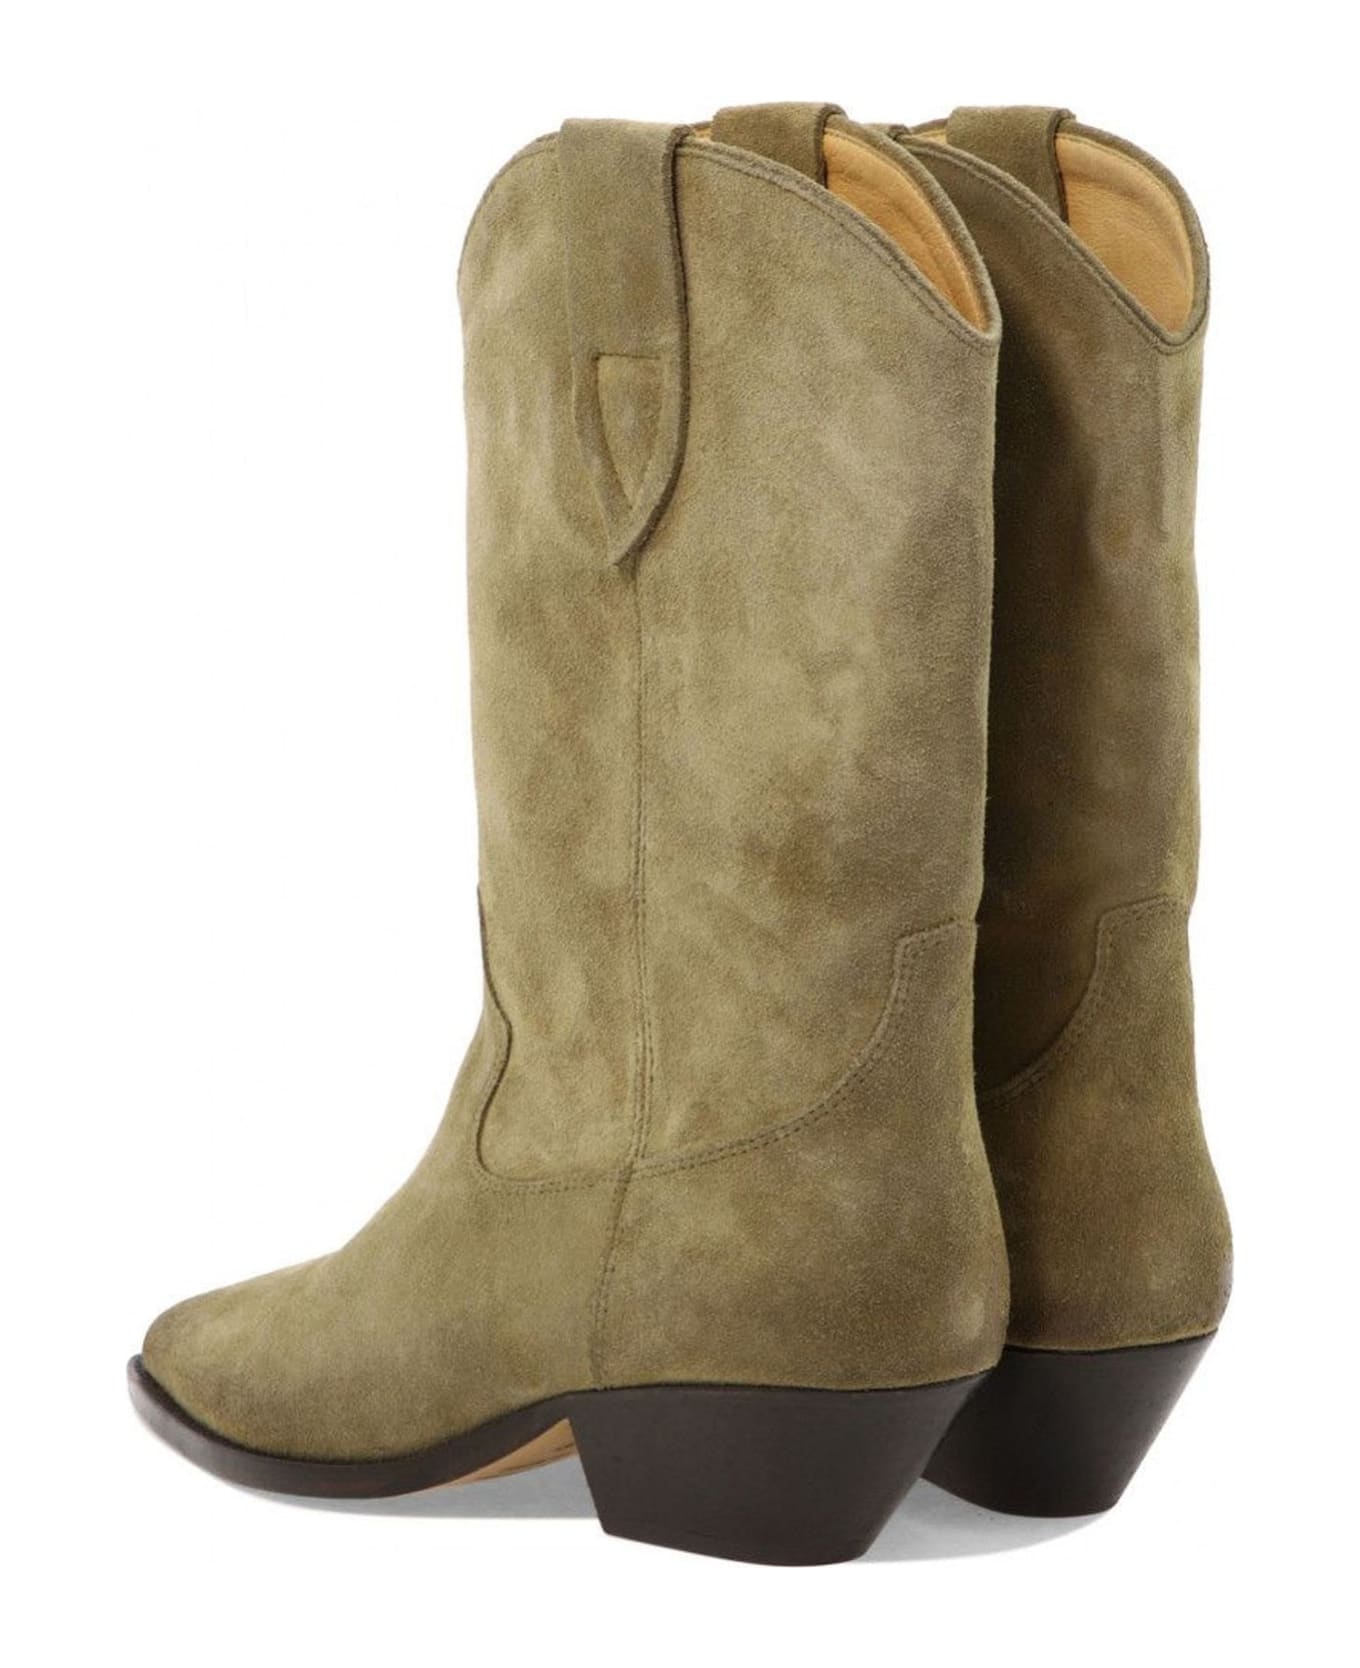 Isabel Marant Suede Boots - Green